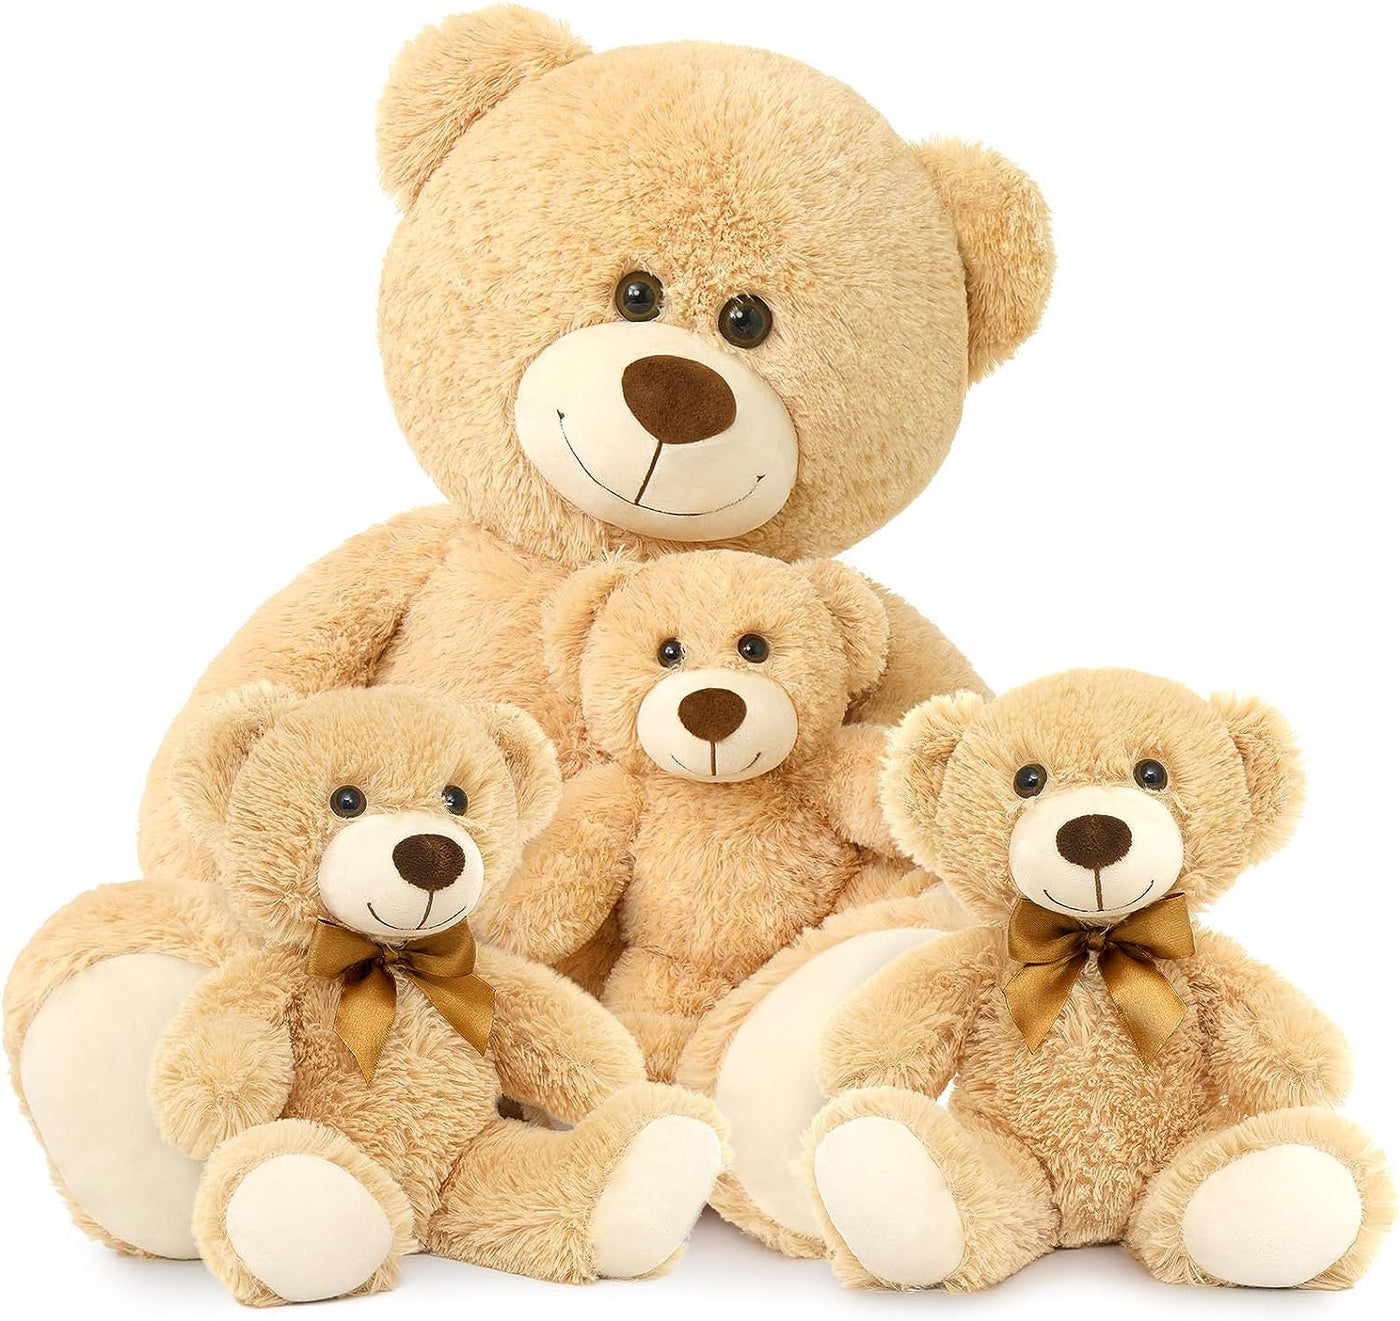 Mom Teddy Bear with 3 Babies Plush Toy Set, Brown, 39 Inches